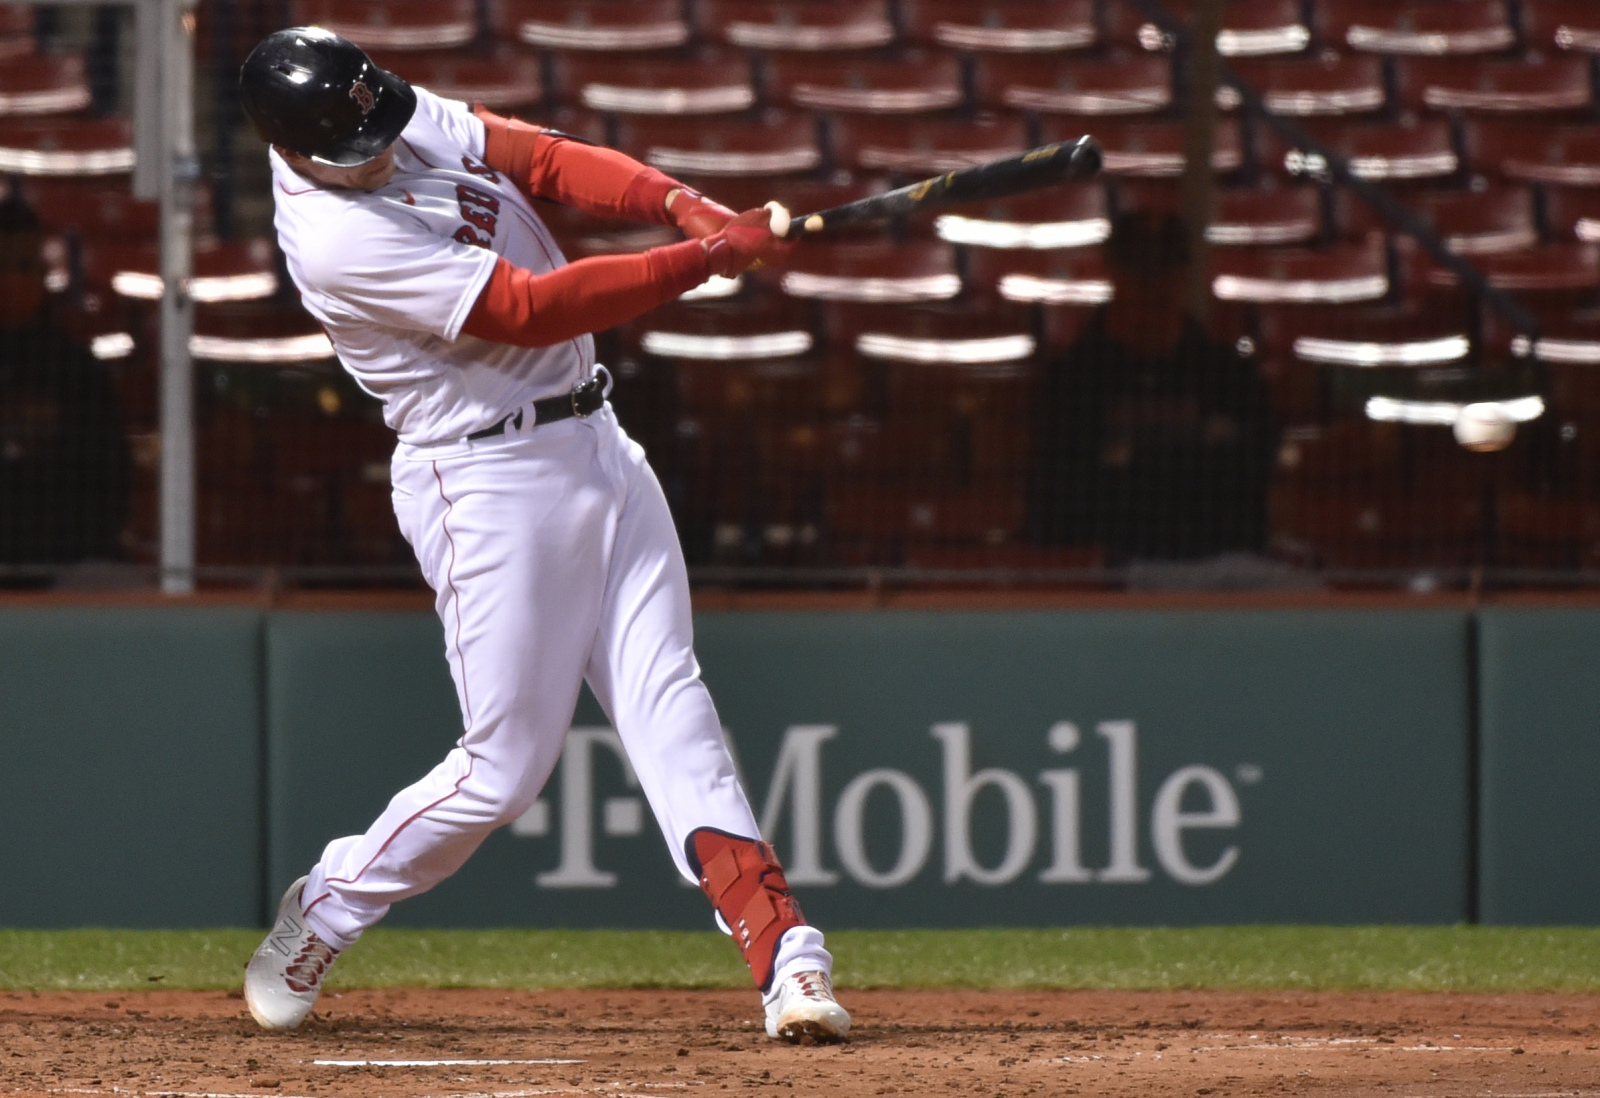 Me vs. me: Debating the prospects for the Boston red Sox